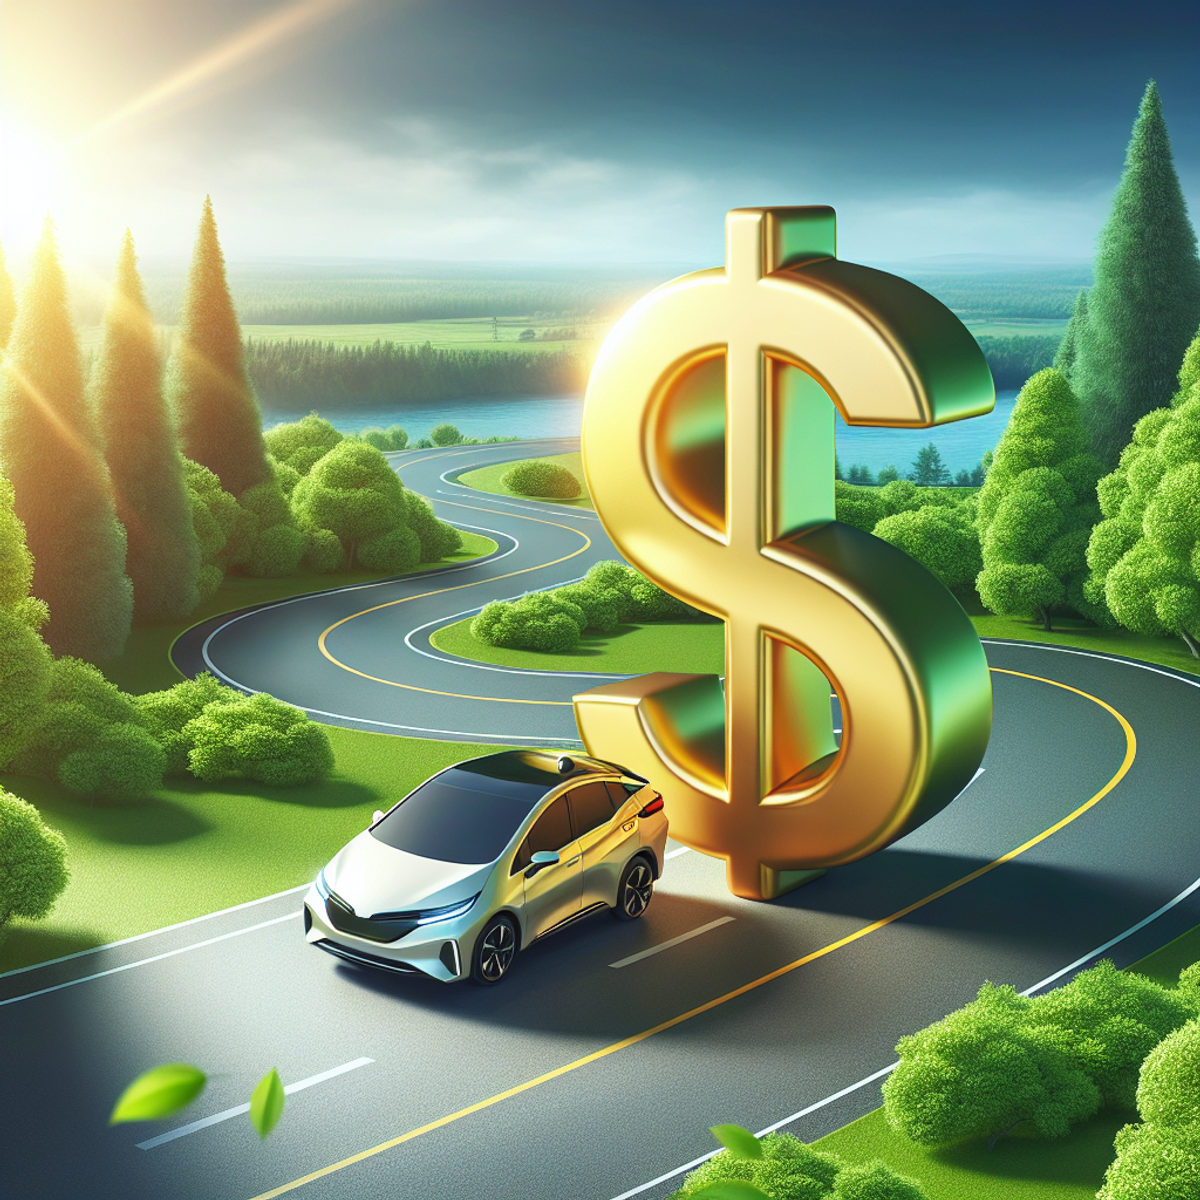 A fuel-efficient car driving on a winding road with a large golden dollar sign nearby.